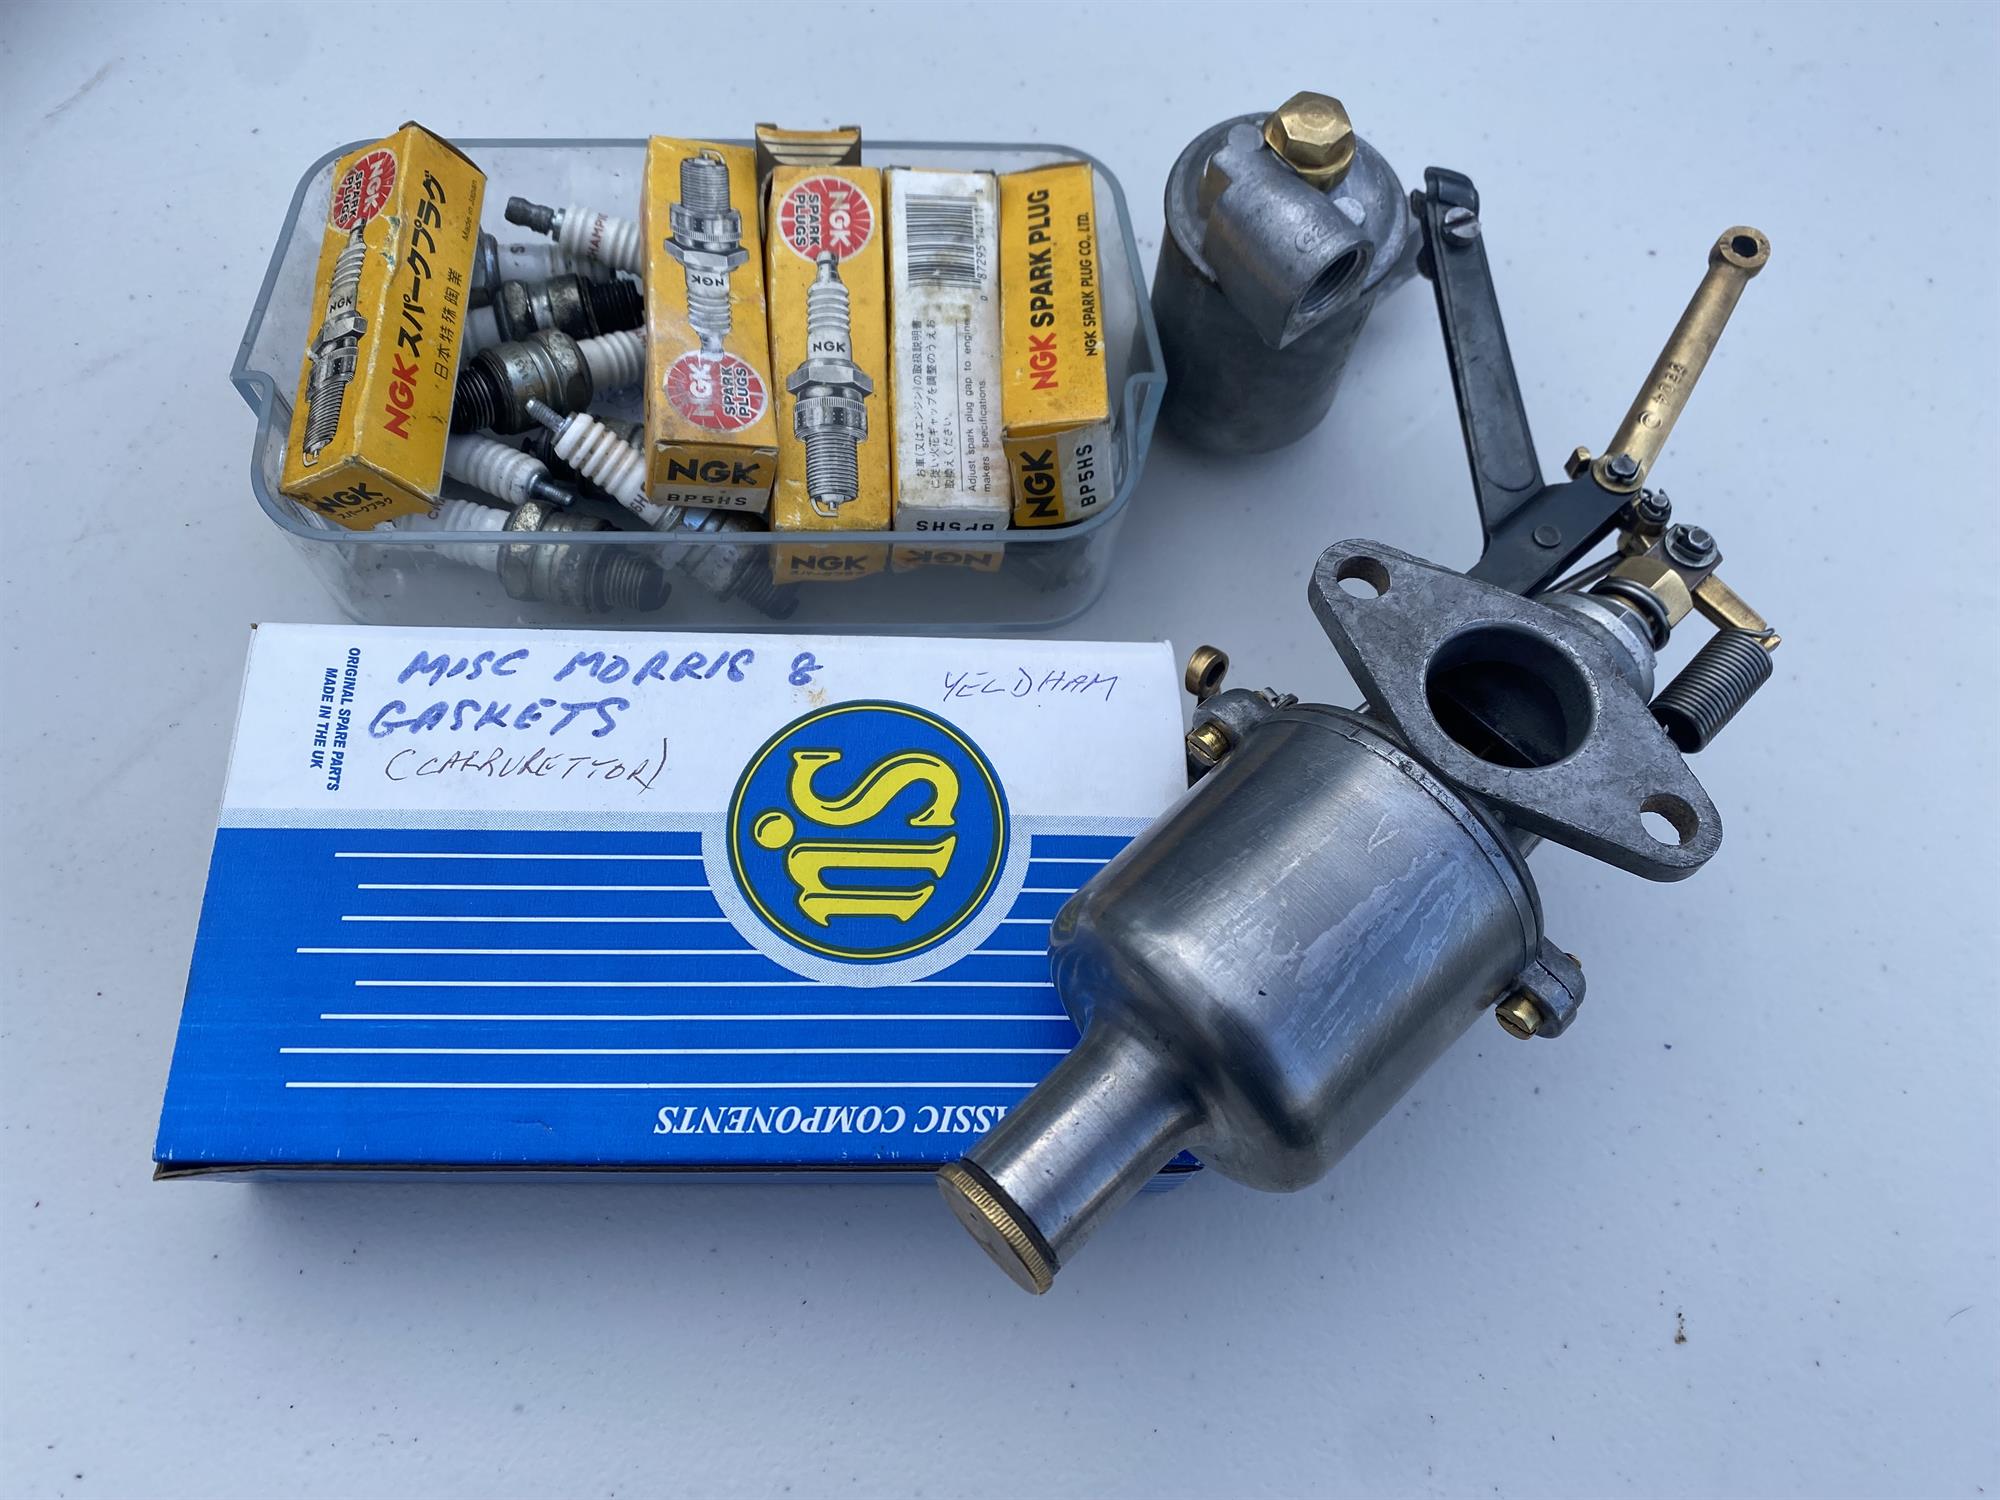 Morris 8 SU carburettor - Completely refurbished. Including Miscellaneous carburettor gaskets.